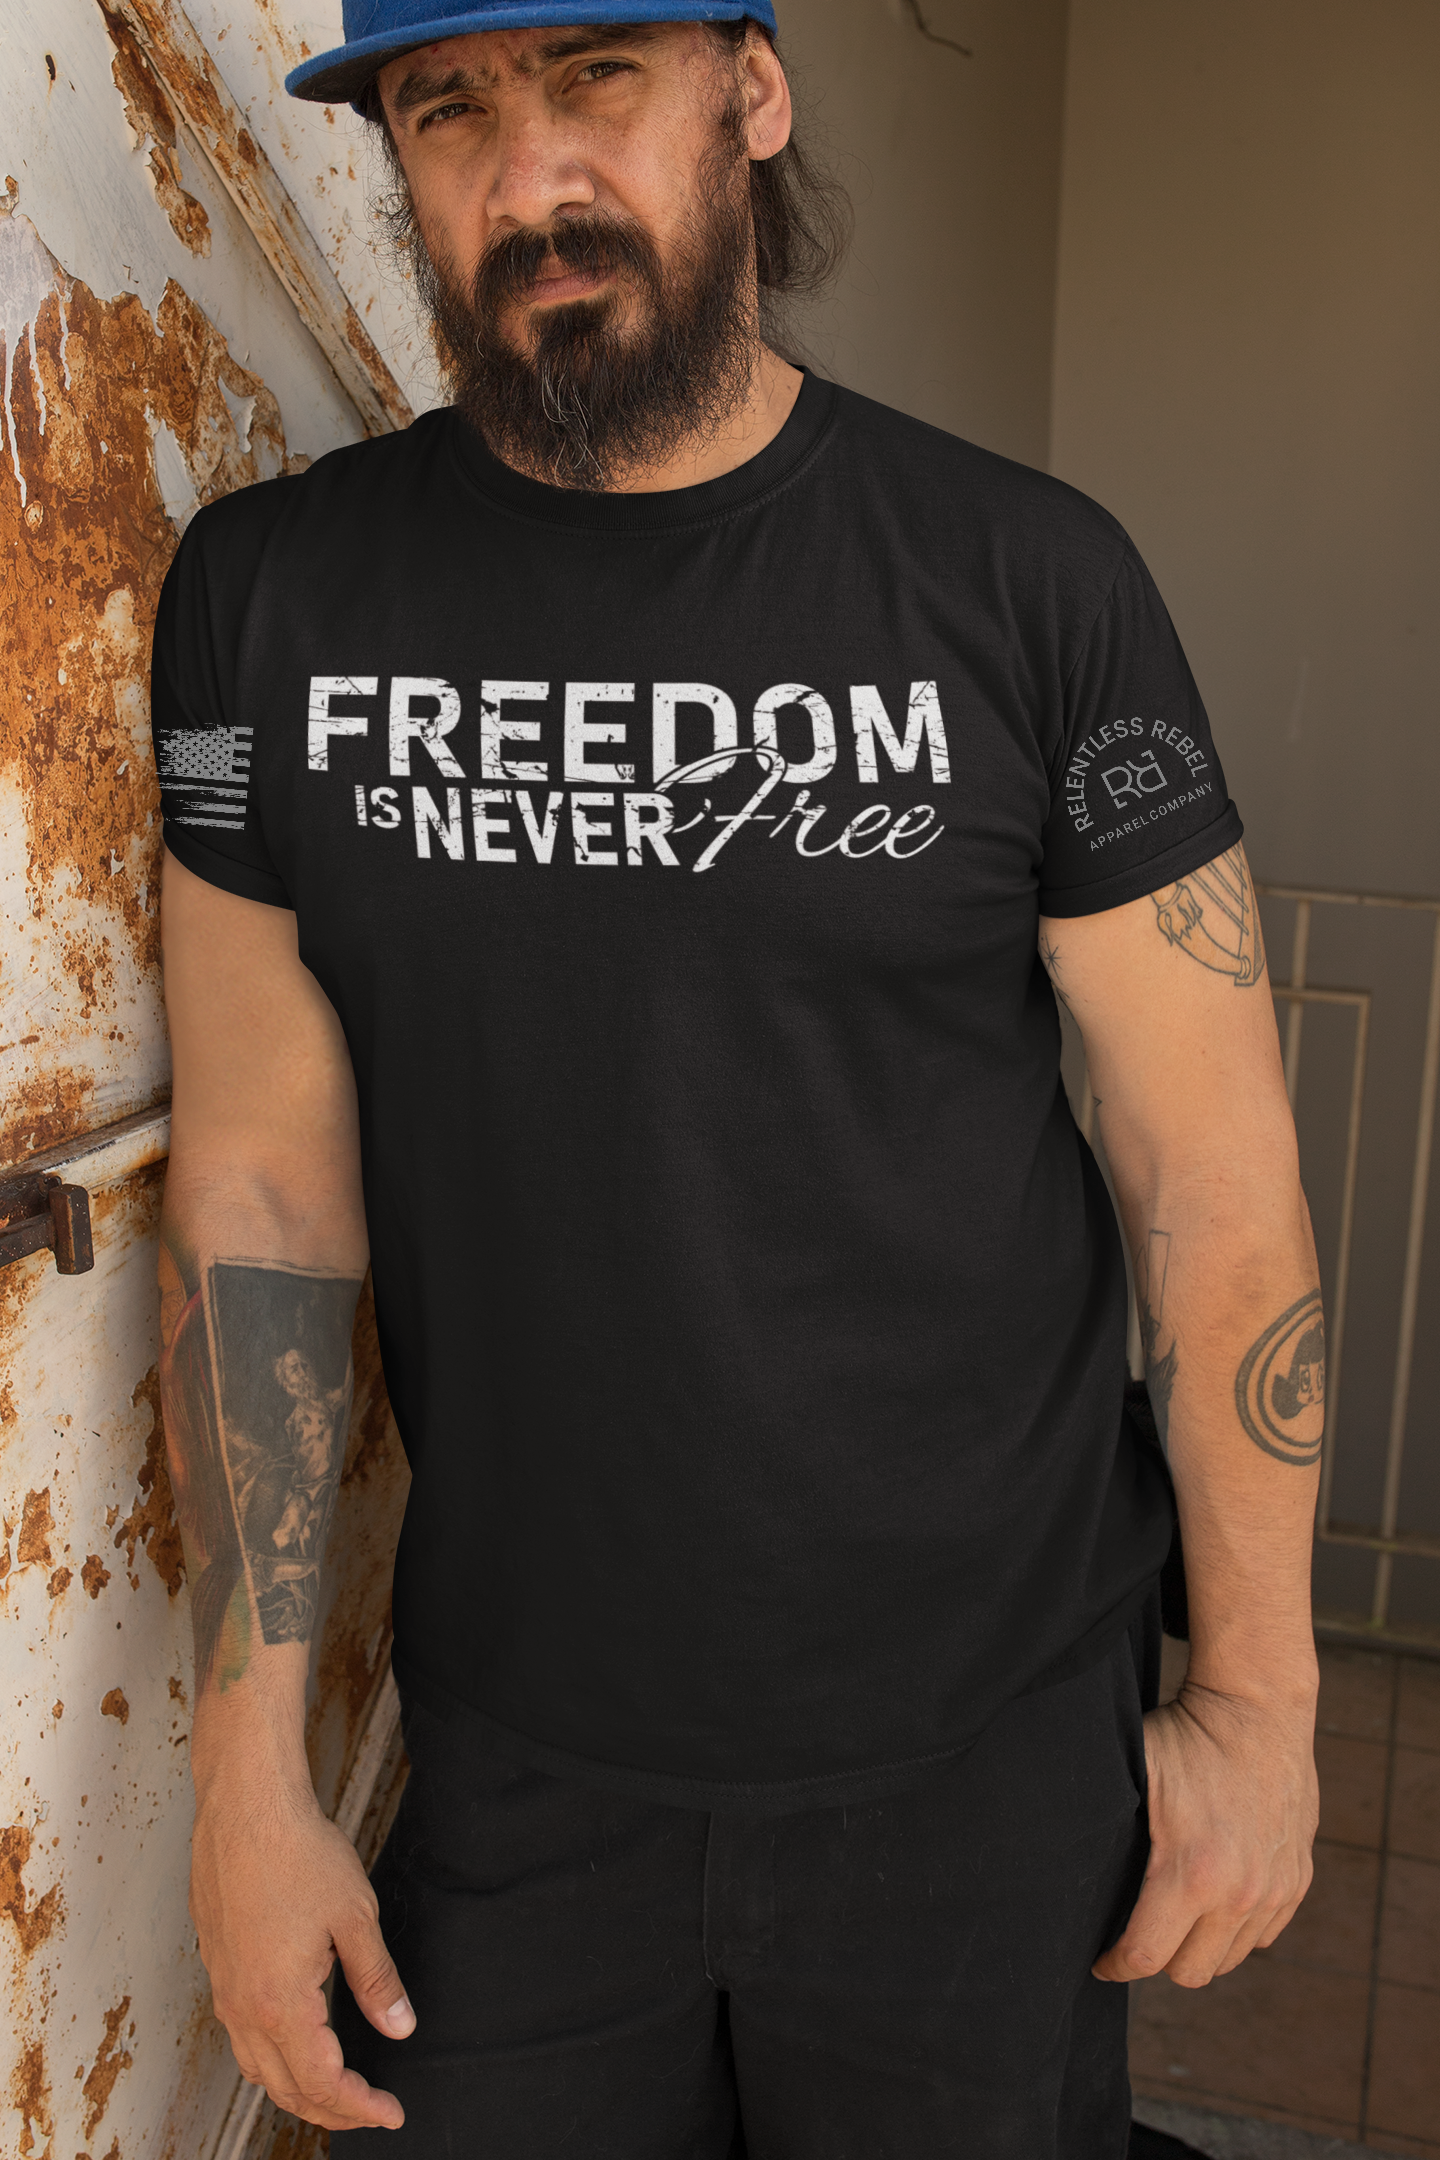 Freedom is Never Free front design t-shirt